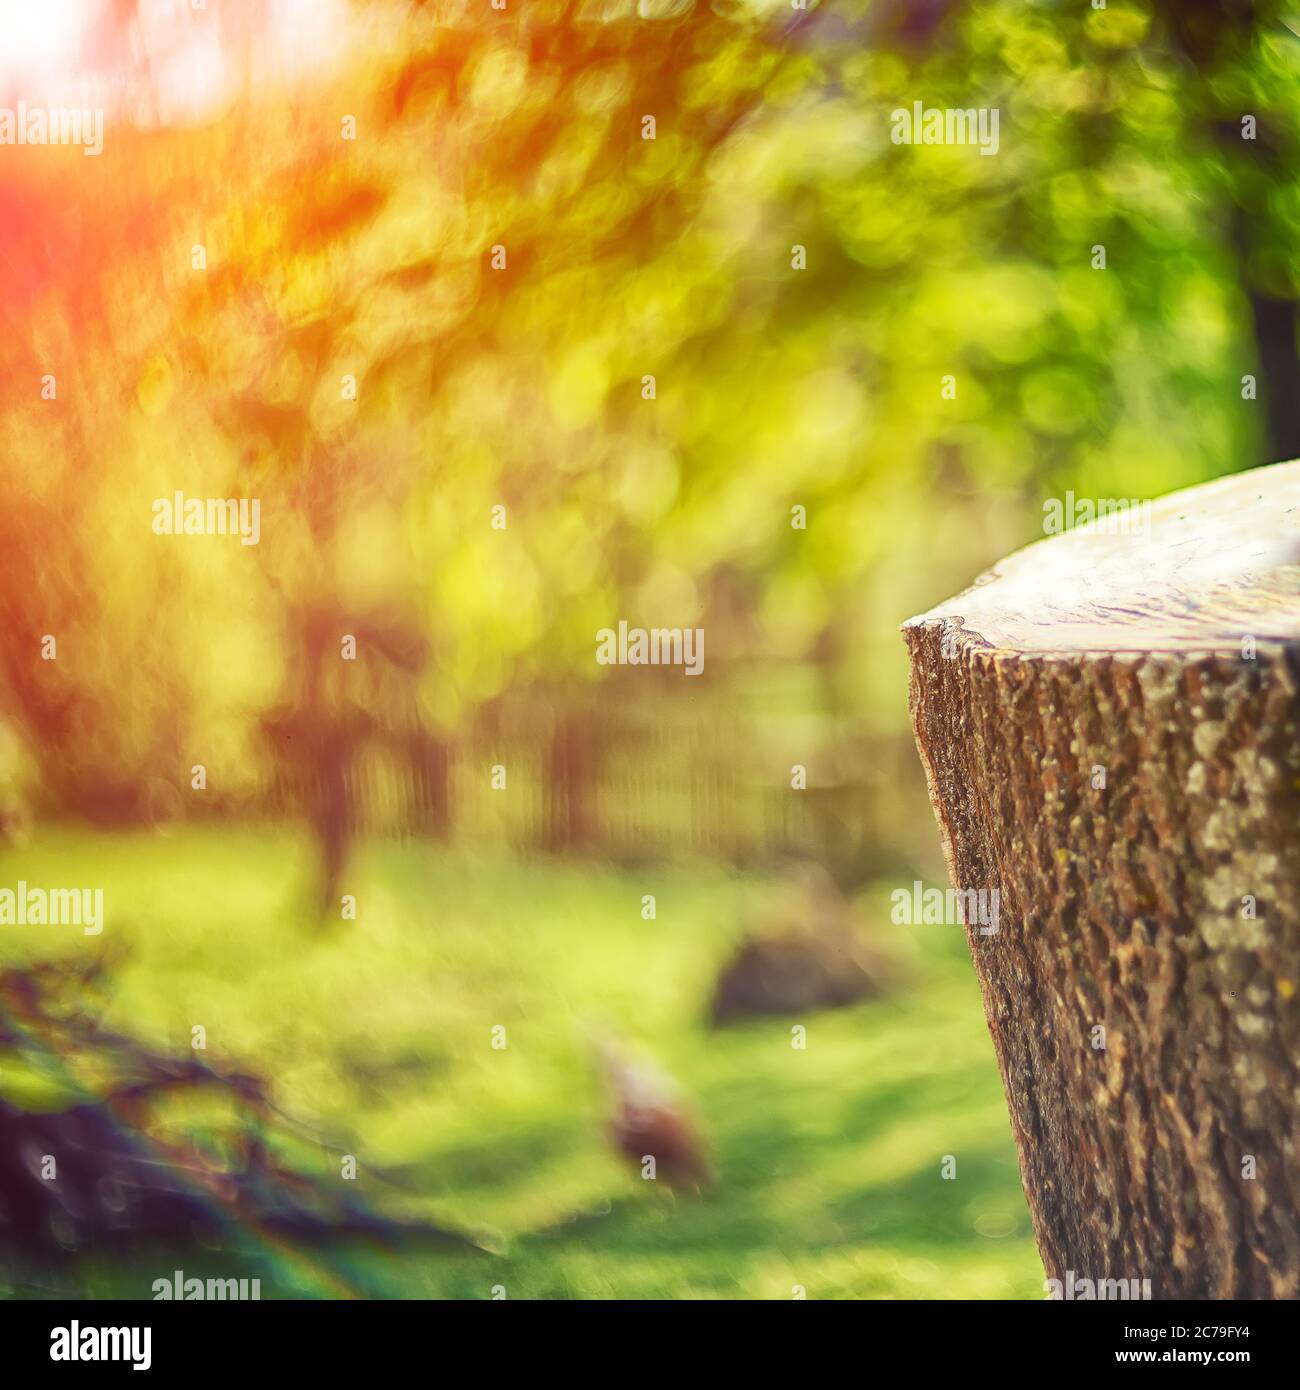 Fresh healthy green bio background with abstract blurred rural landscape and bright summer sunlight. tree stump in the foreground Stock Photo